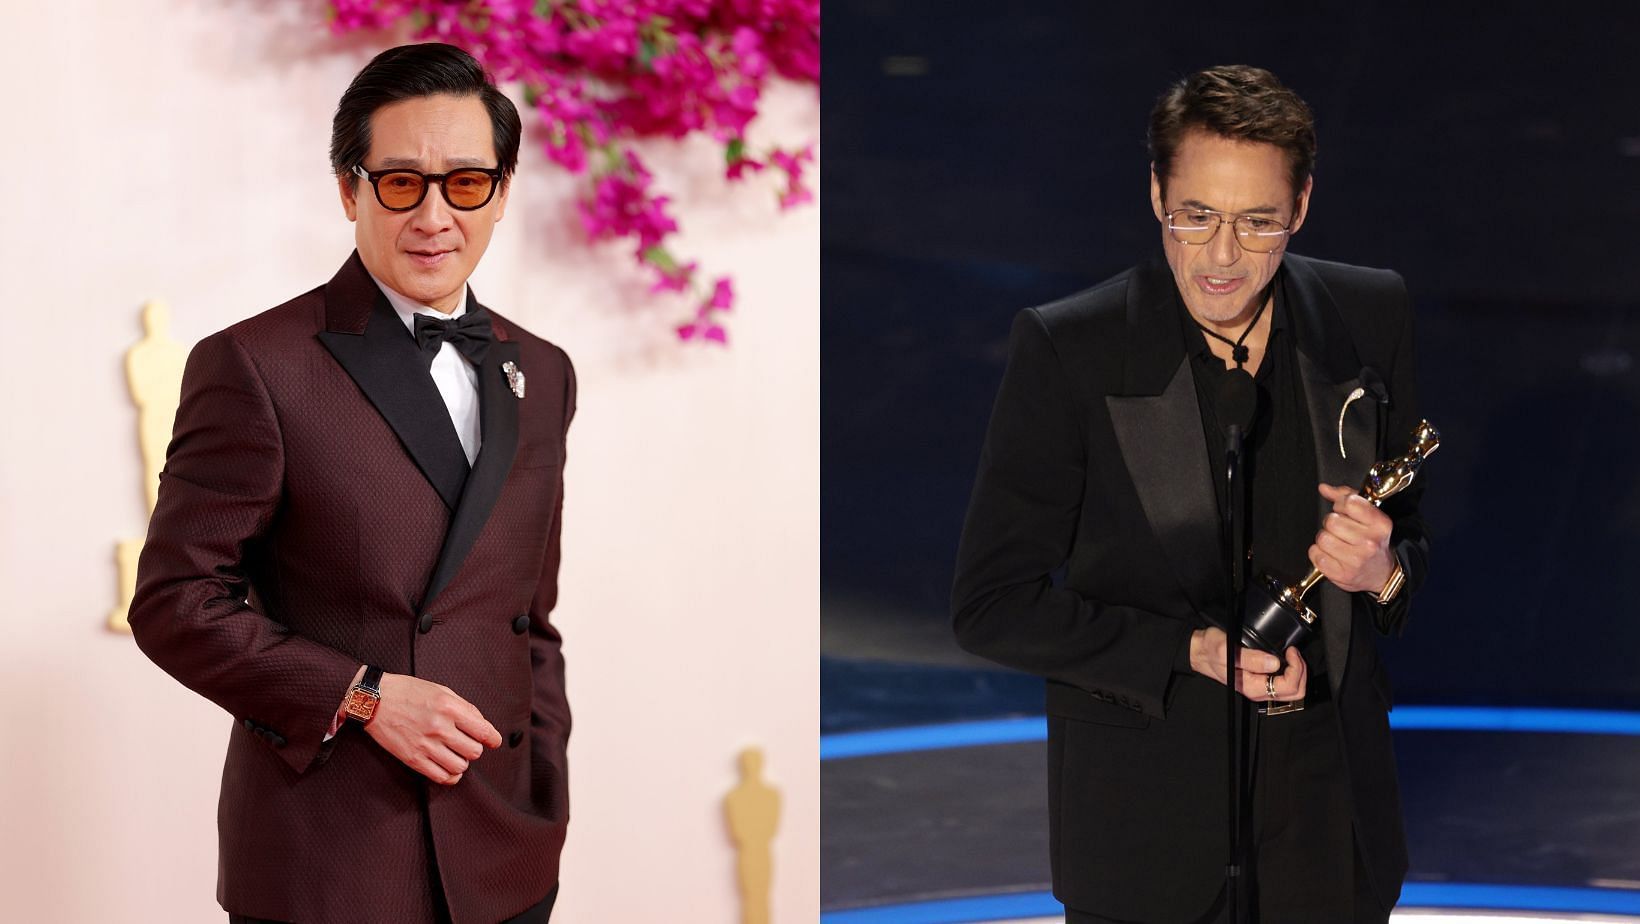 Robert Downey Jr. allegedly ignoring Ke Huy Quan onstage at the 2024 Oscars. (Image via X/@WinterMoon1013)